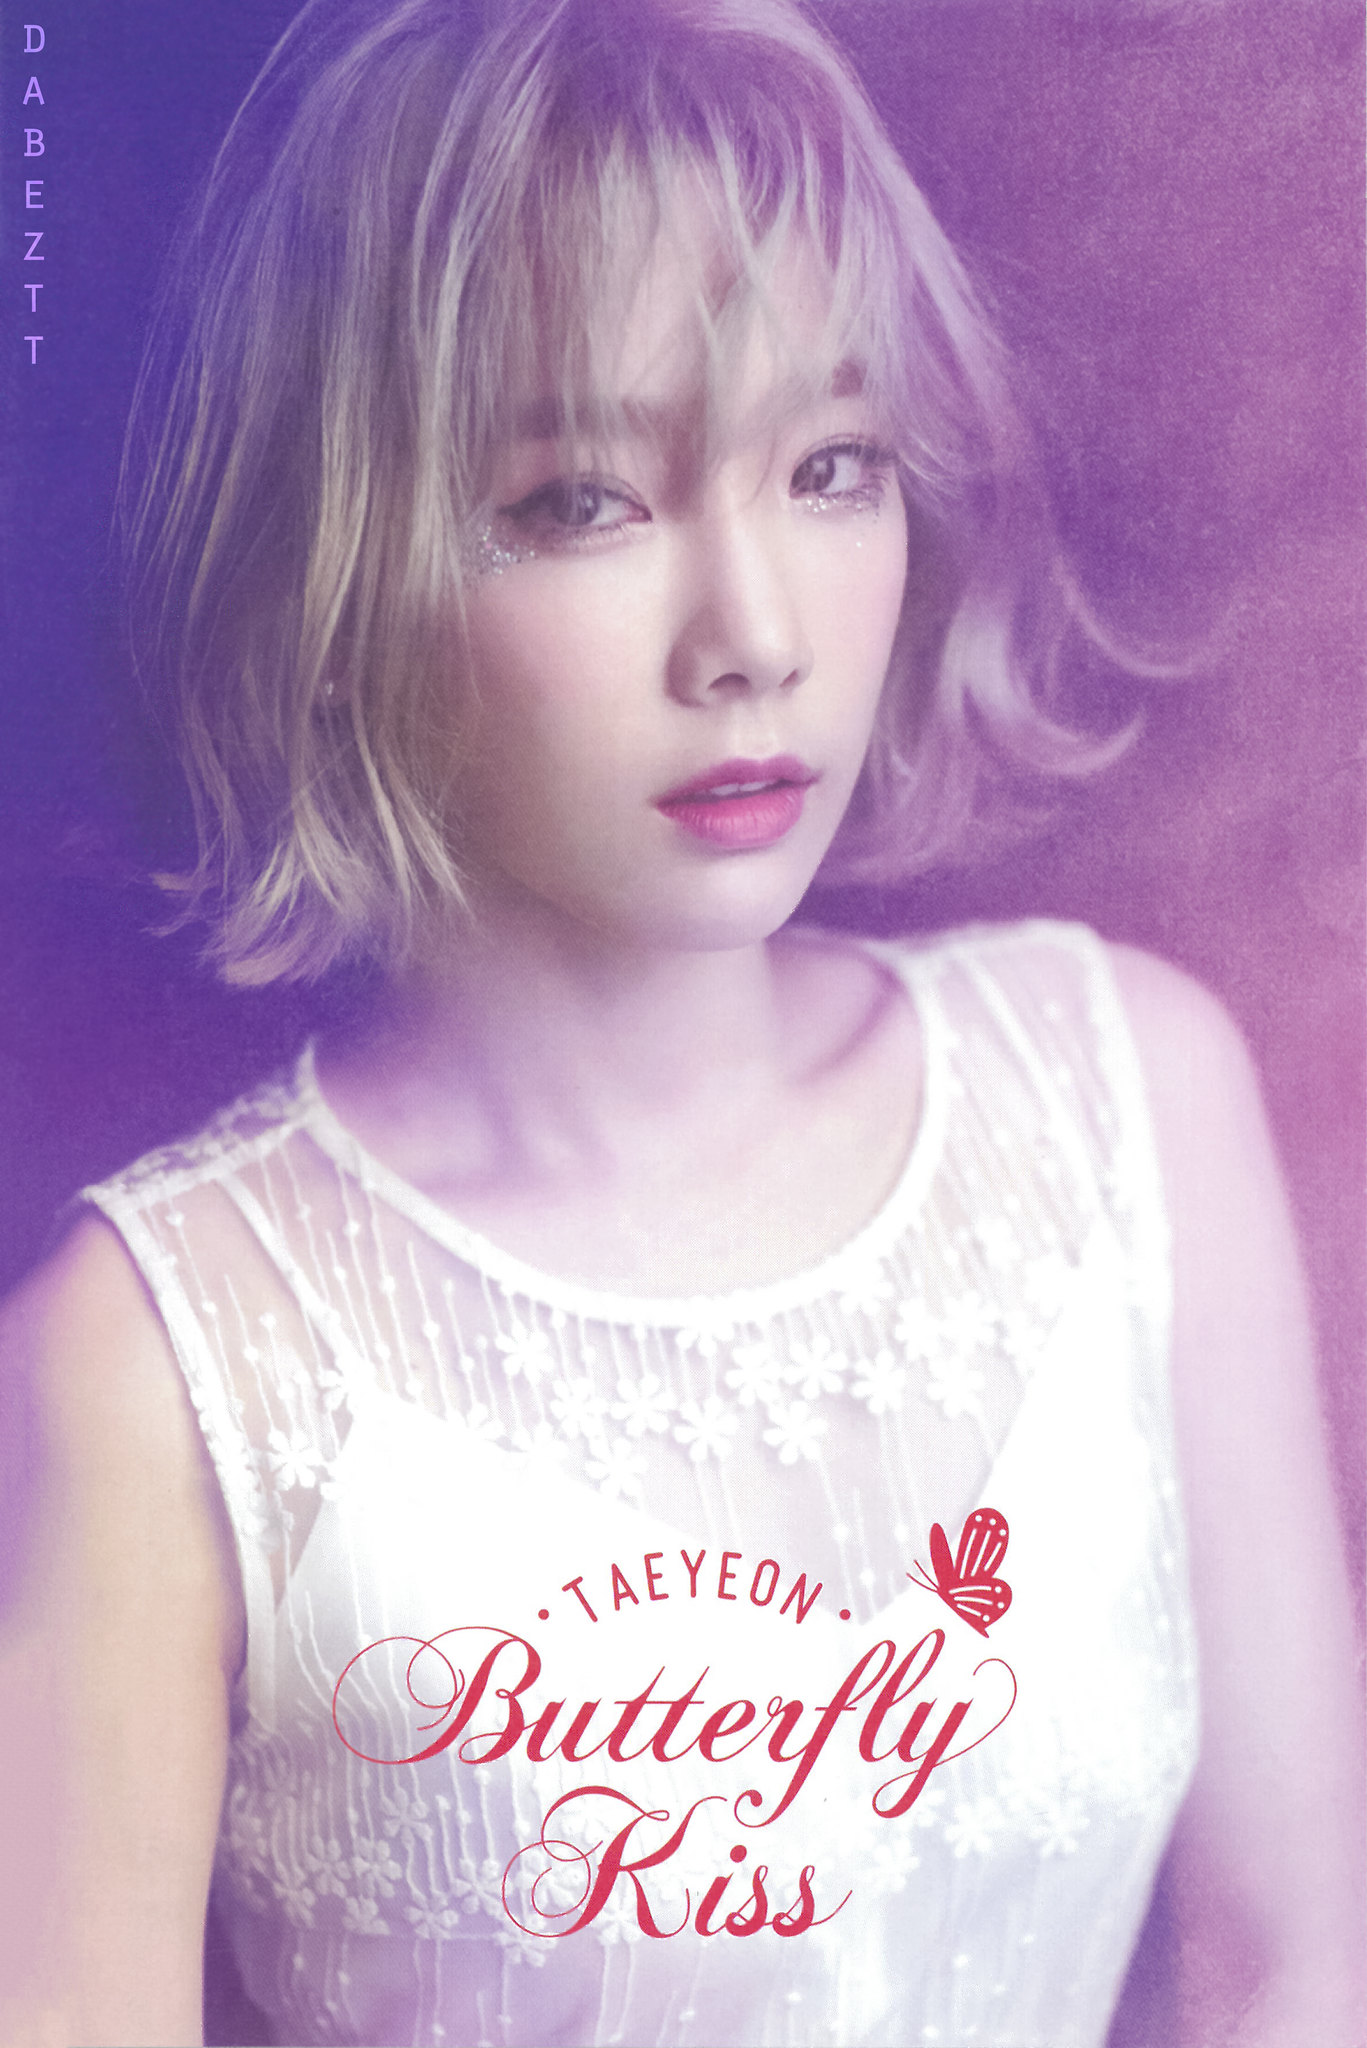 [PIC][24-05-2016]TaeYeon @ Solo Concert “Butterfly Kiss” 27660579443_1b66d643b3_k